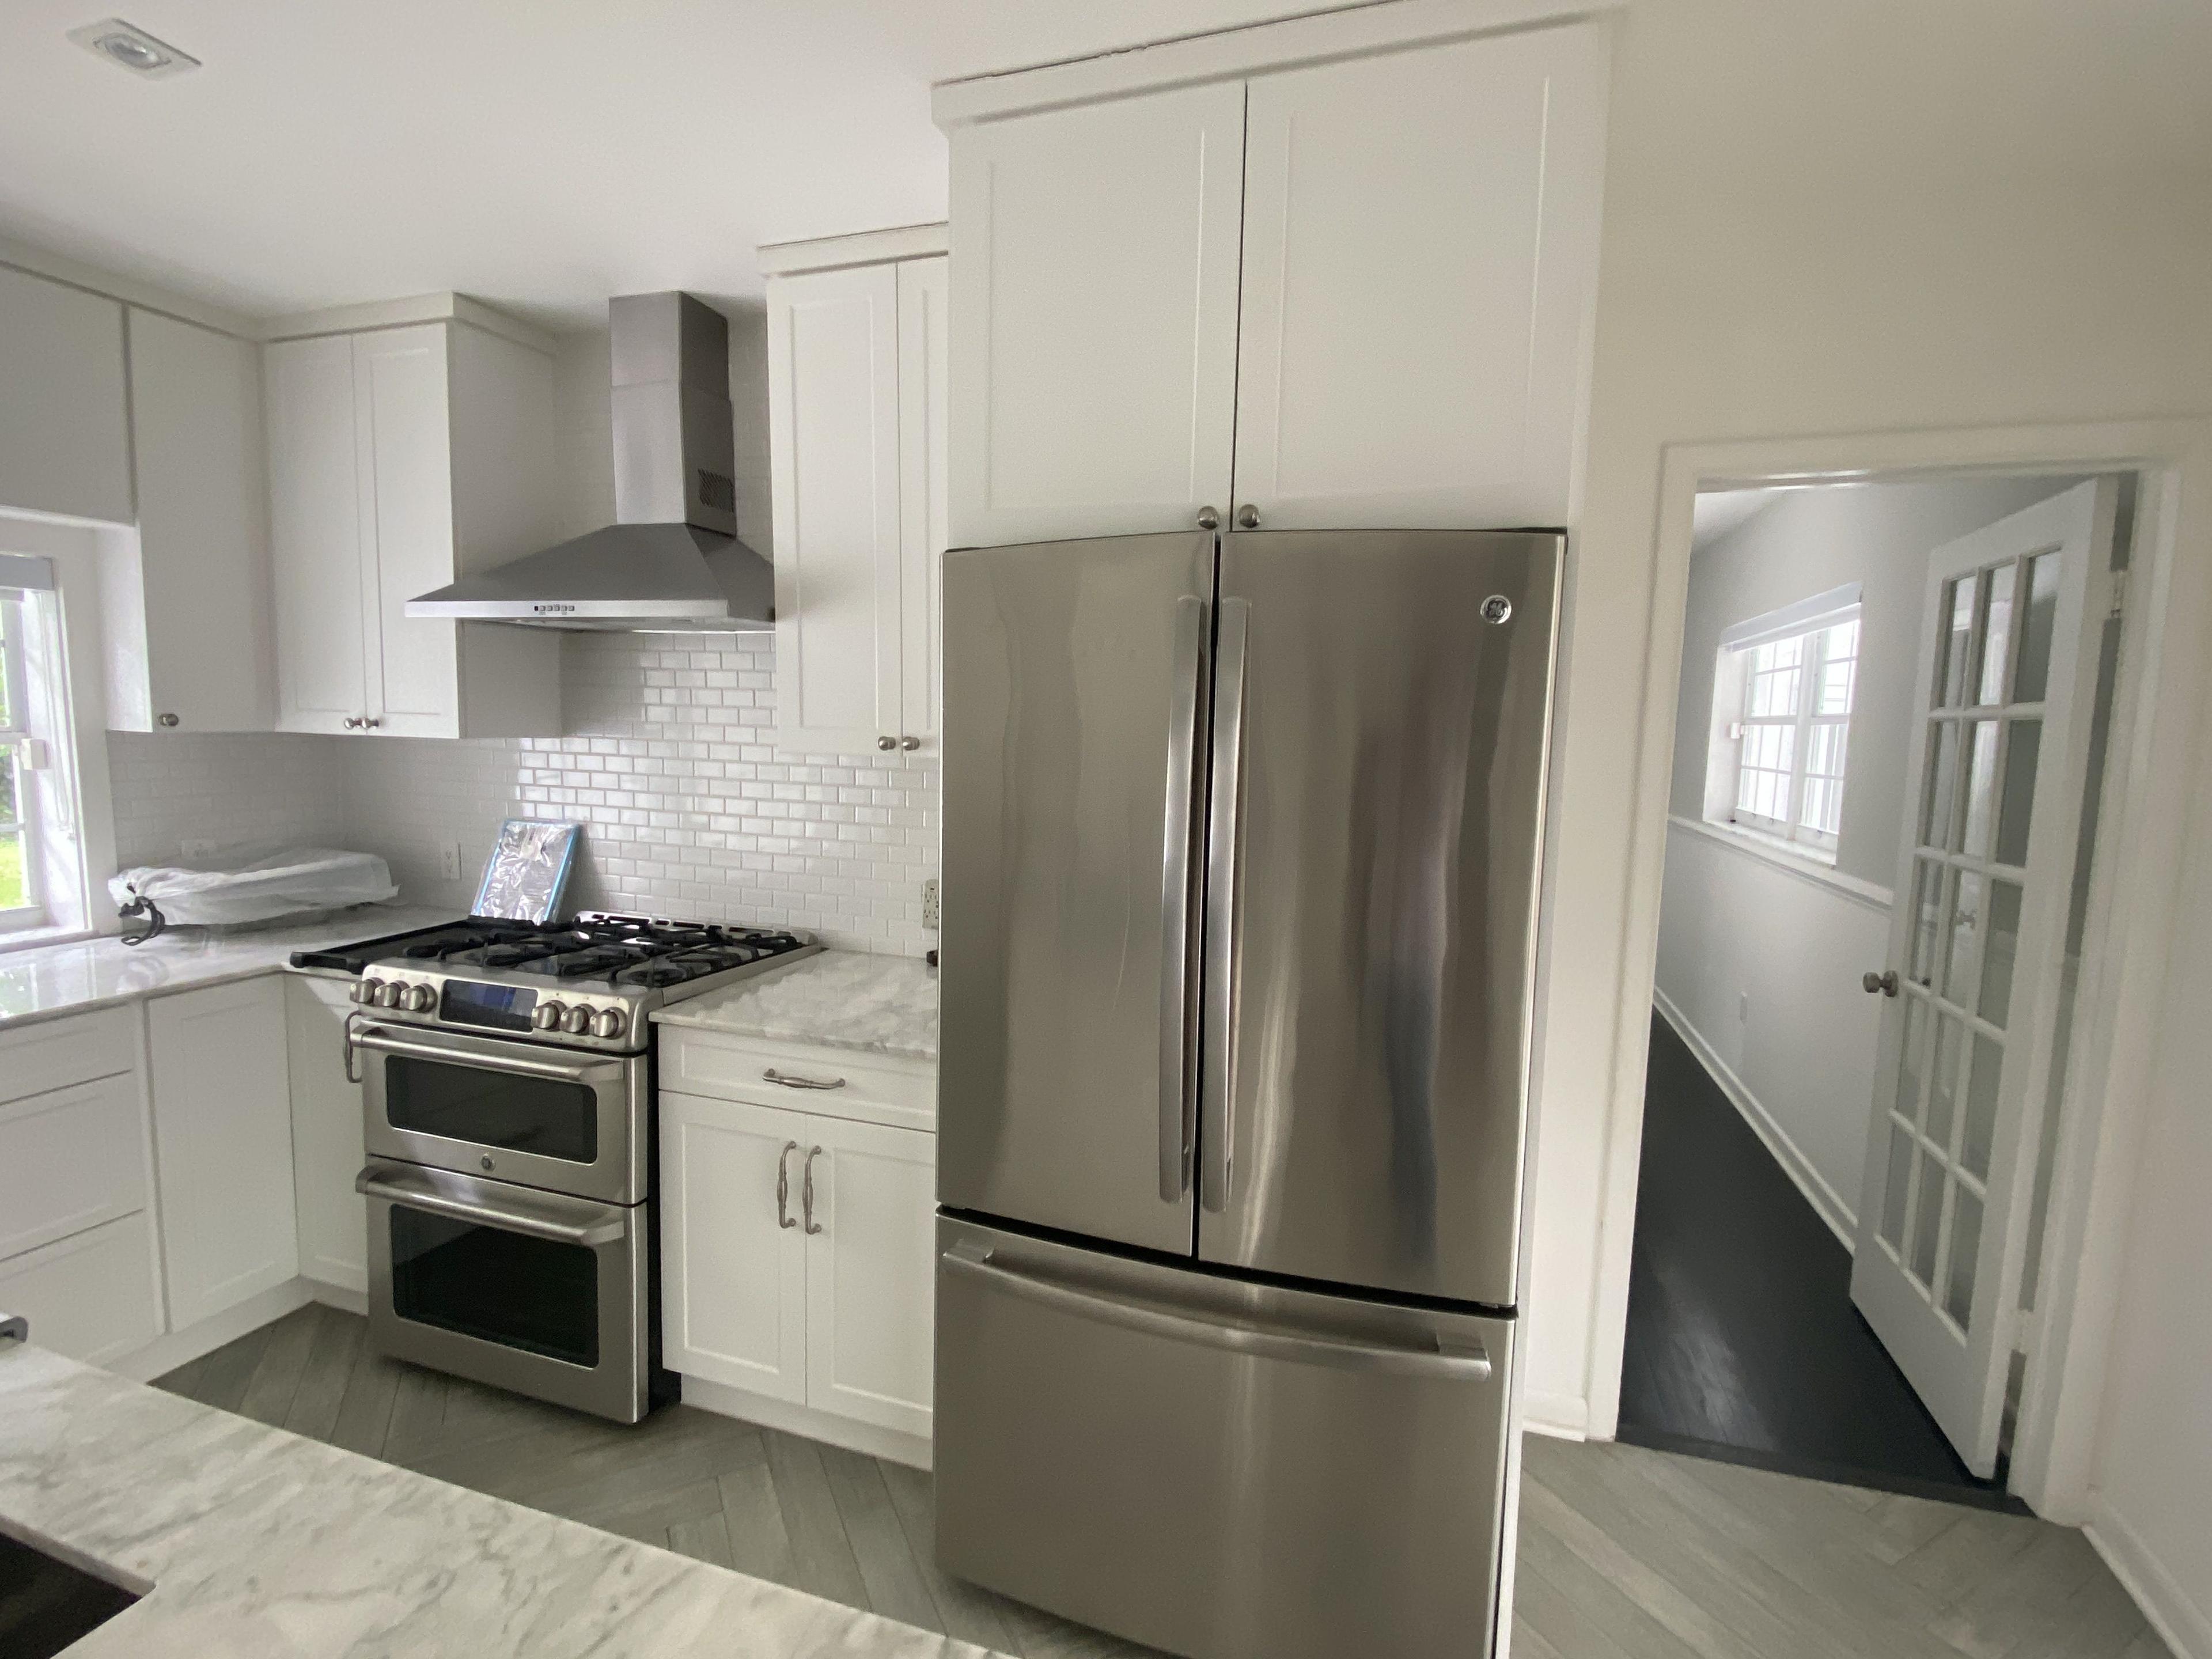 11' By 9' L-Shaped Carrera Marble White Kitchen, With 8' Island. Includes Six Double Doors, Upper Ca